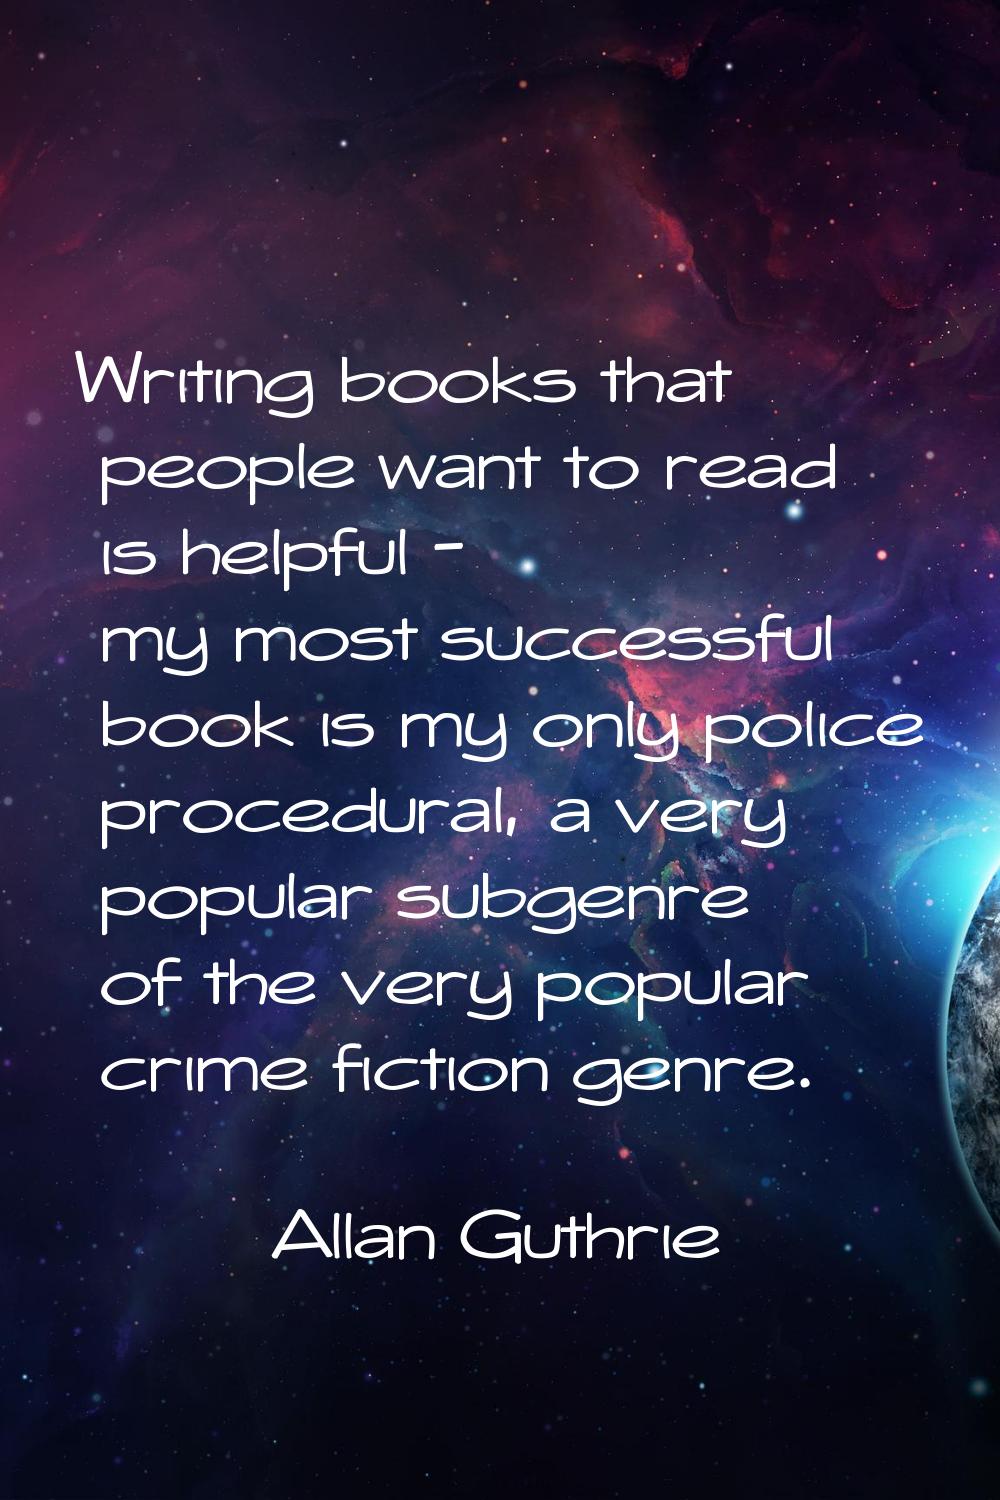 Writing books that people want to read is helpful - my most successful book is my only police proce